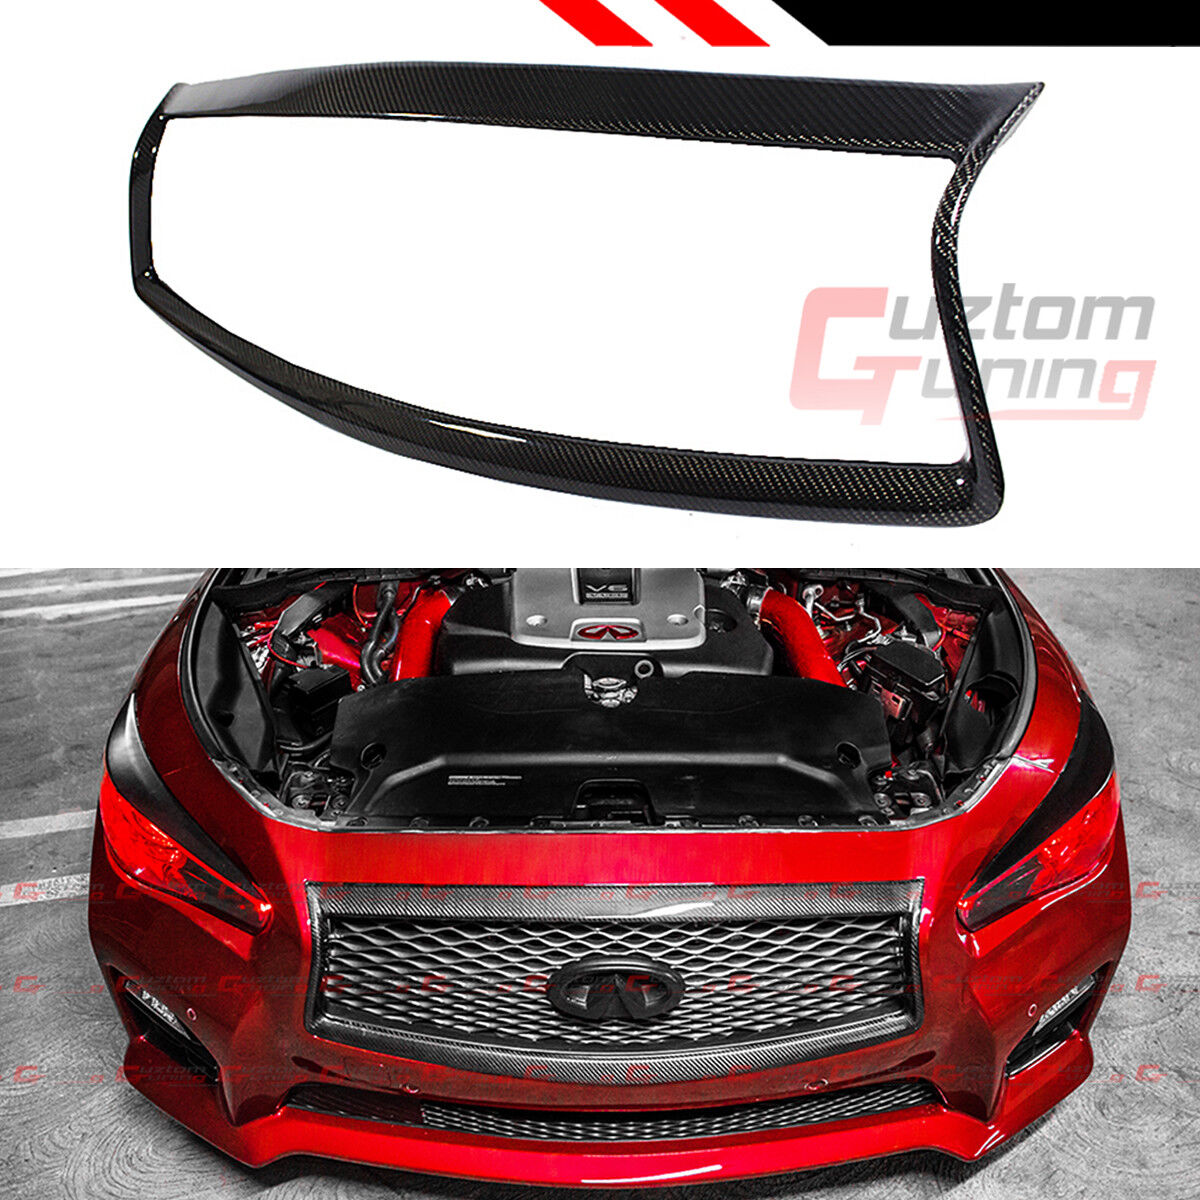 FOR:2014-2017 INFINITI Q50 S CARBON FIBER FRONT GRILL OUTLINE TRIM COVER OVERLAY